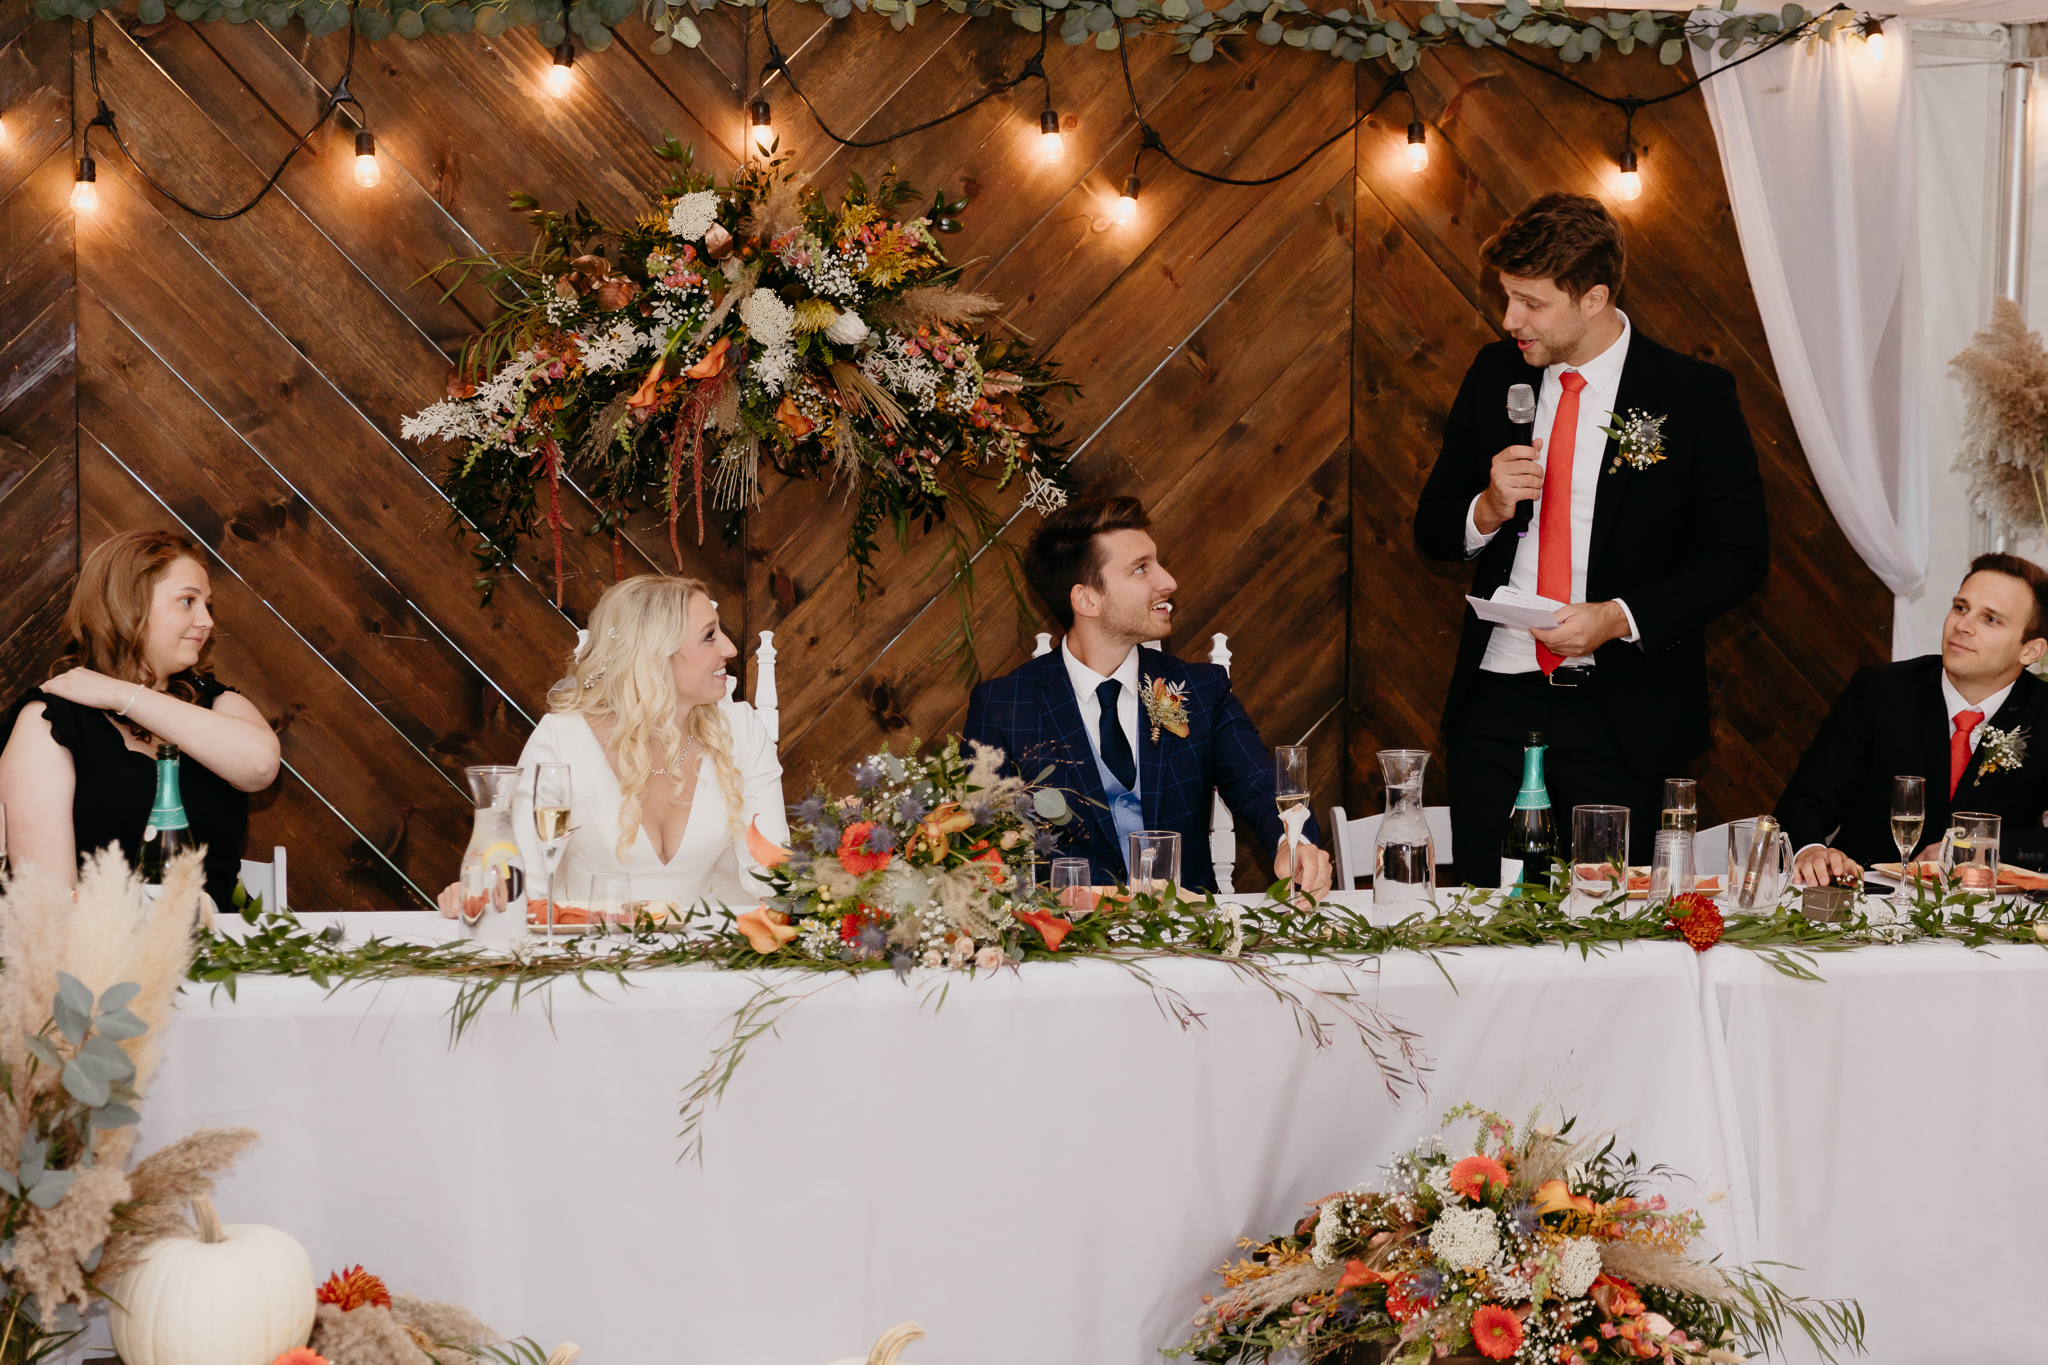 Groom and bride sitting at table, looking at best man give a speech in a white tent wedding